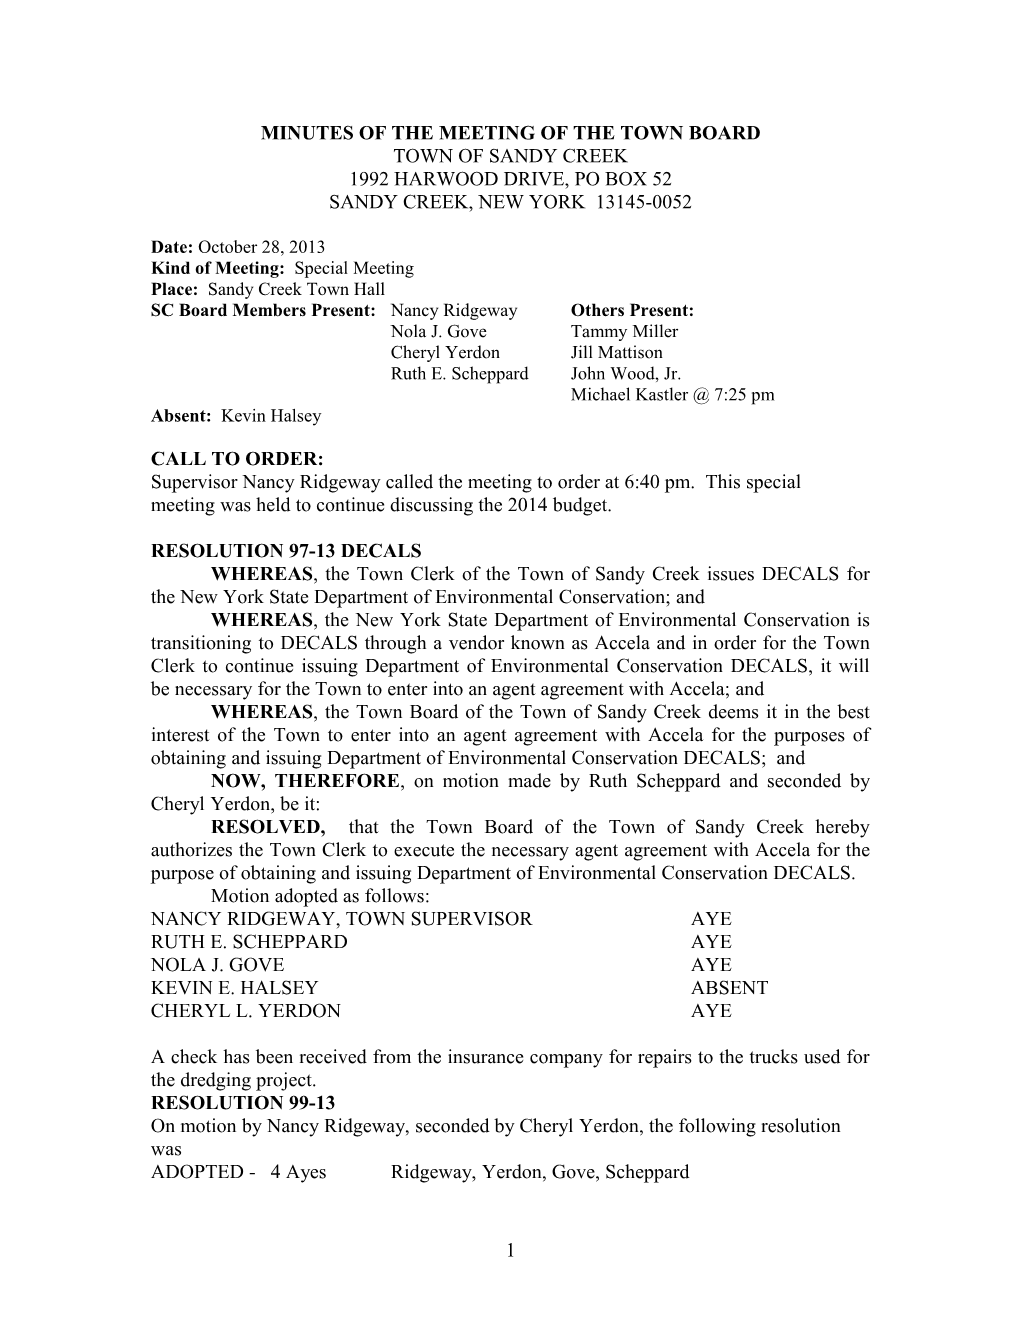 Minutes of the Meeting of the Town Board s1